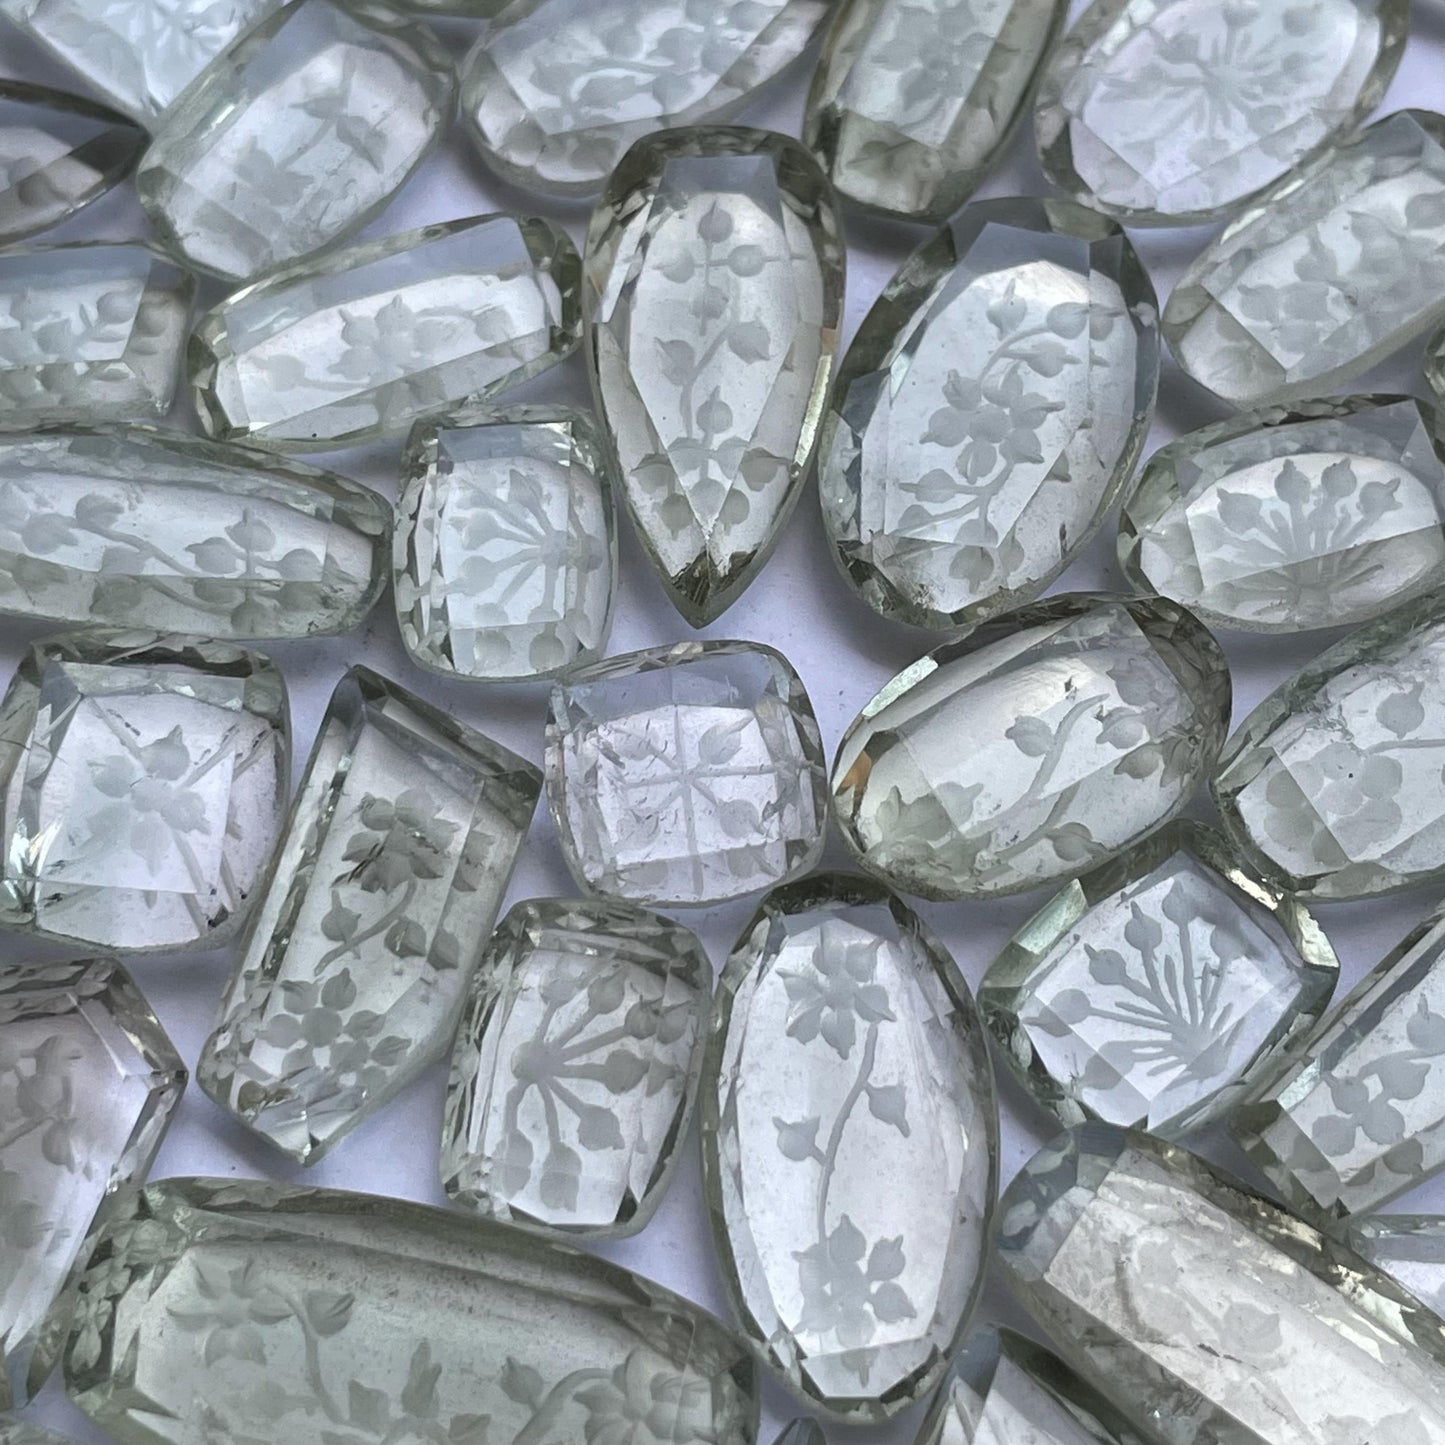 Exquisite Green Amethyst Carving: A Captivating Display of Beauty